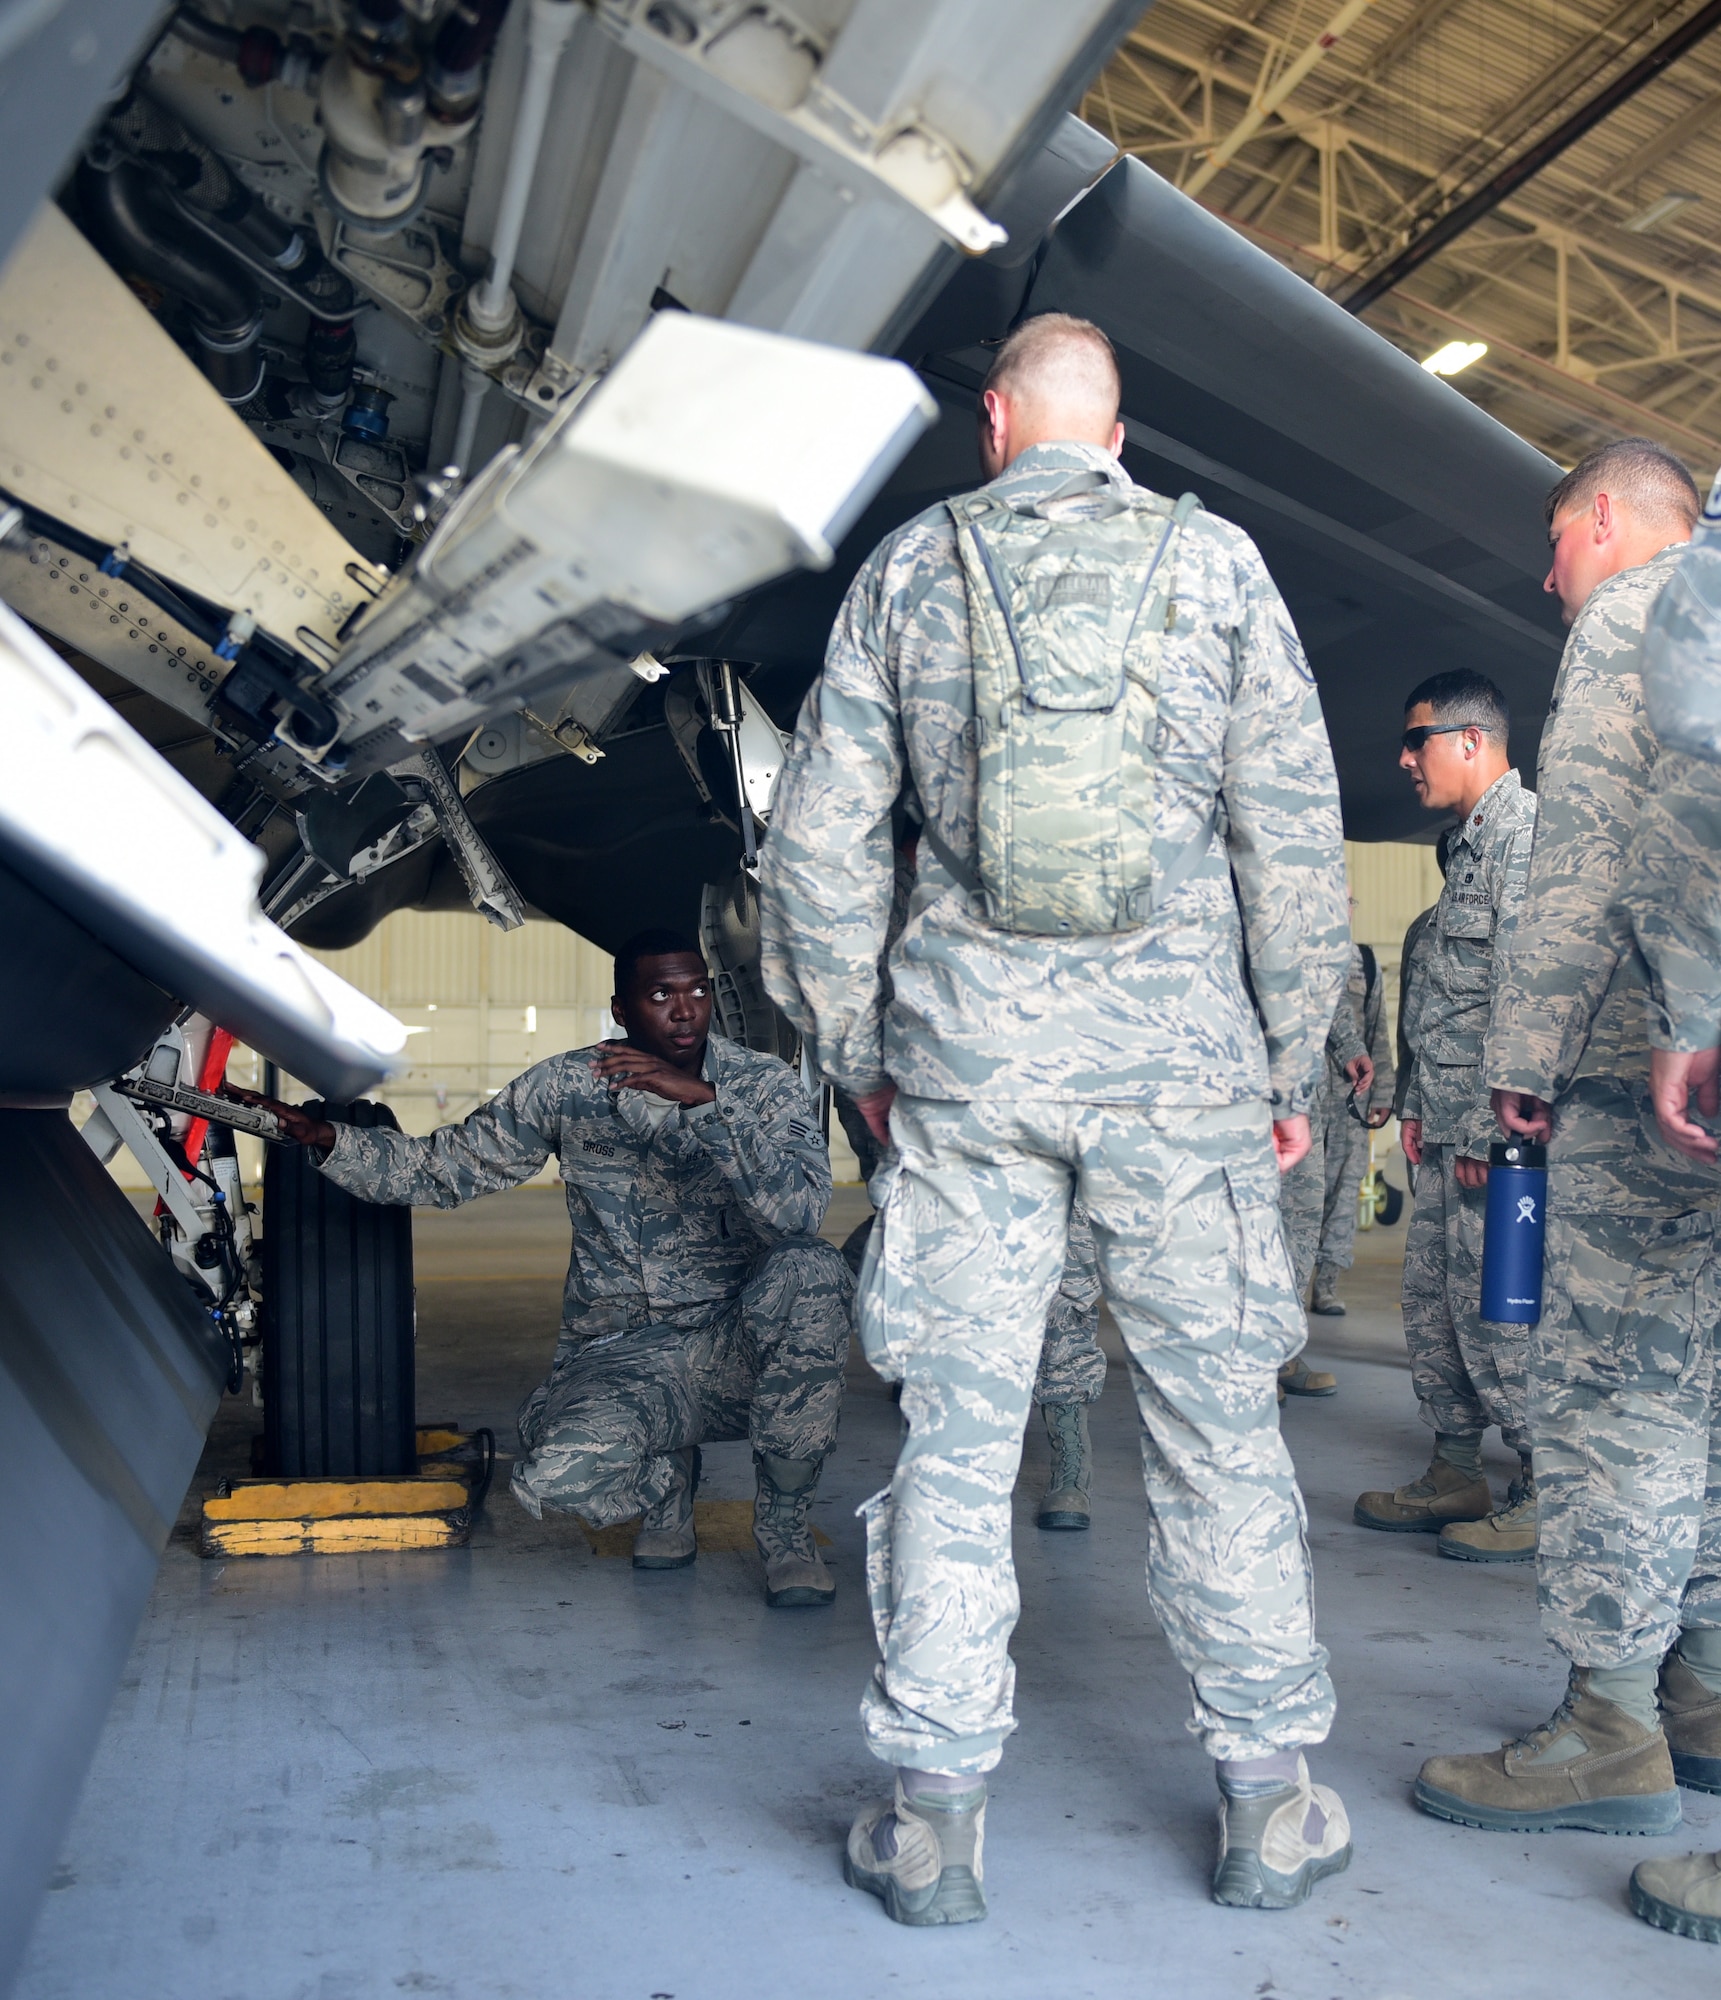 Airmen examine the operations of an F-22 Raptor munitons hull.